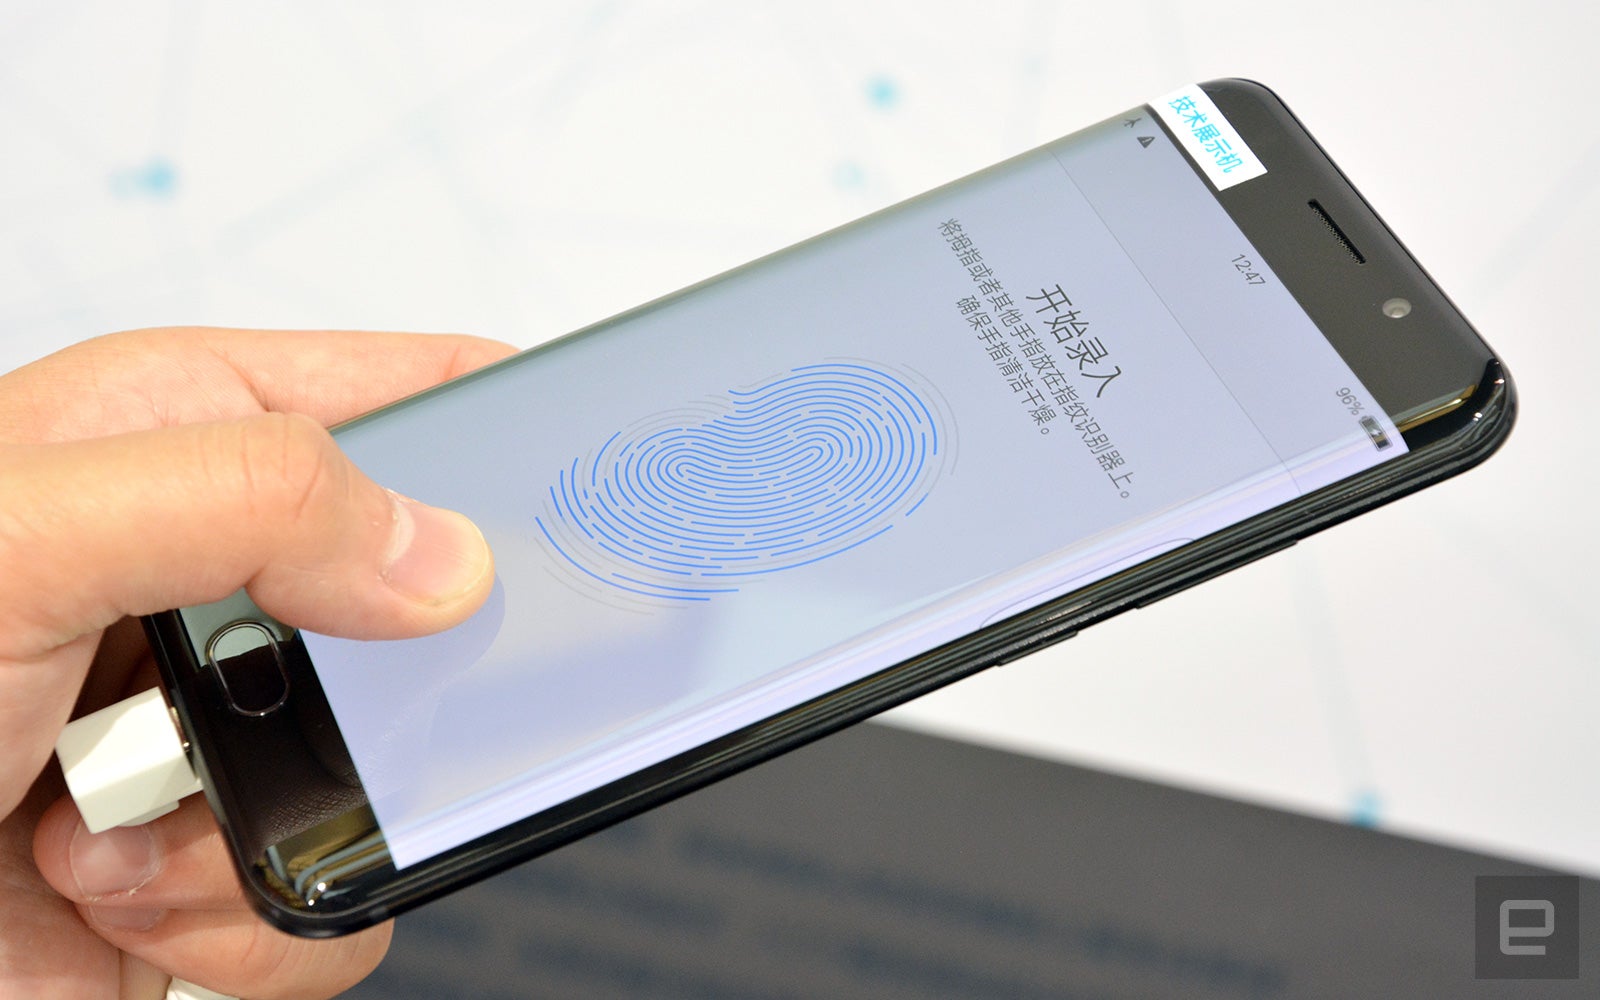 Image courtesy of Engadget - Vivo is showing off a working in-screen fingerprint scanner prototype, courtesy of new Qualcomm tech